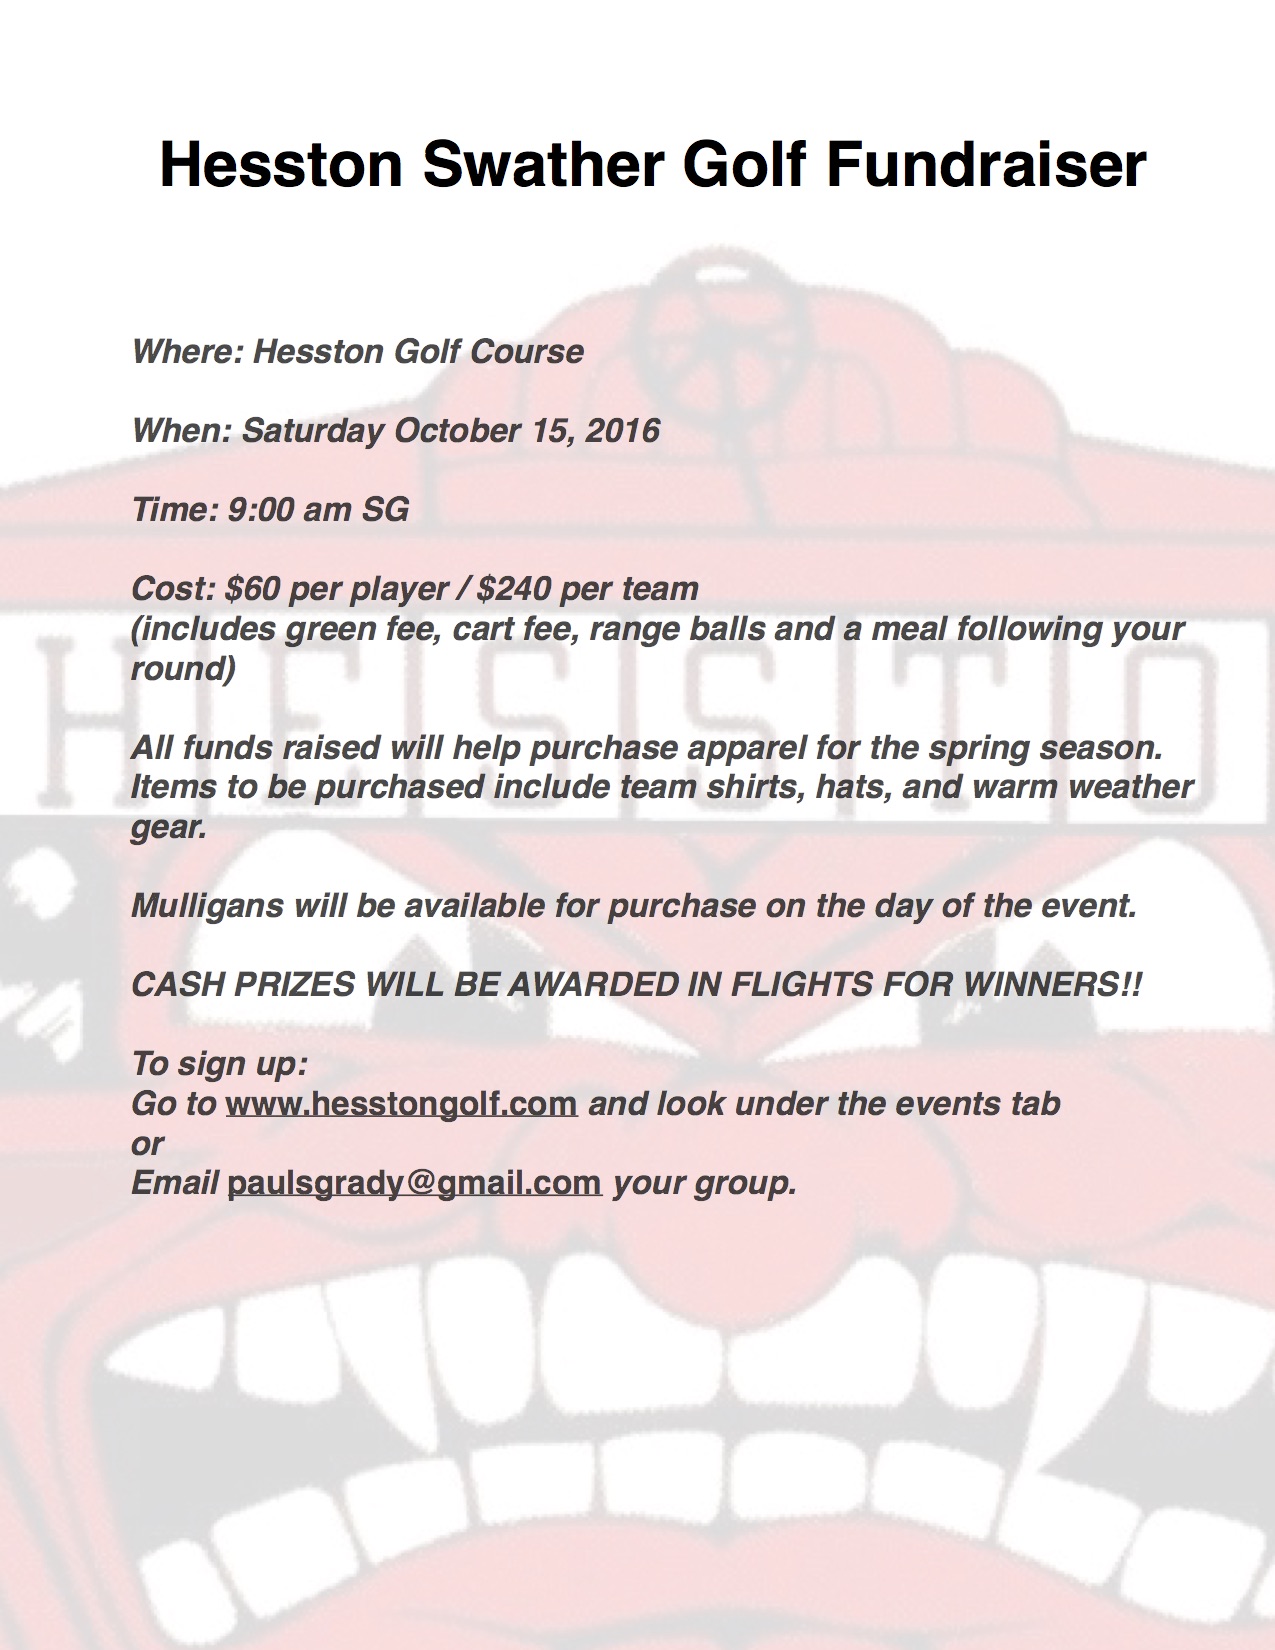 Swather Golf Fundraiser Updated Date